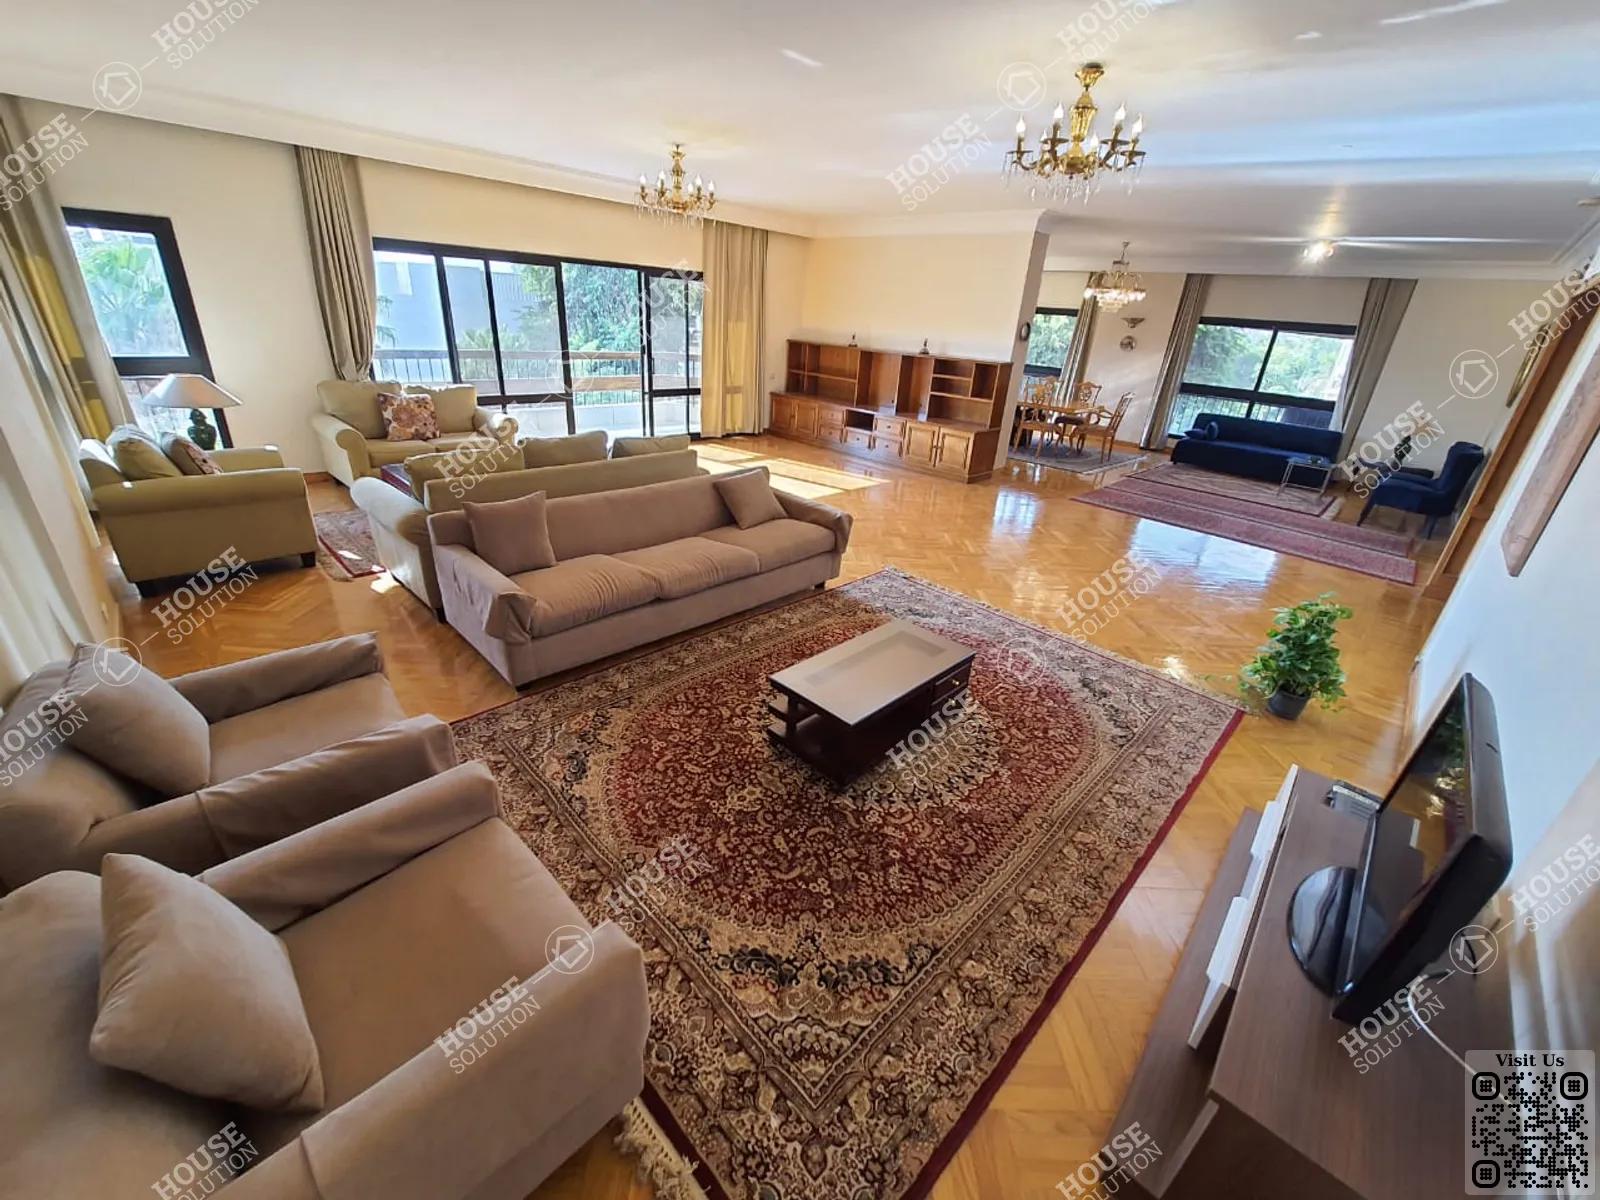 RECEPTION  @ Apartments For Rent In Maadi Maadi Degla Area: 400 m² consists of 4 Bedrooms 4 Bathrooms Furnished 5 stars #5154-0